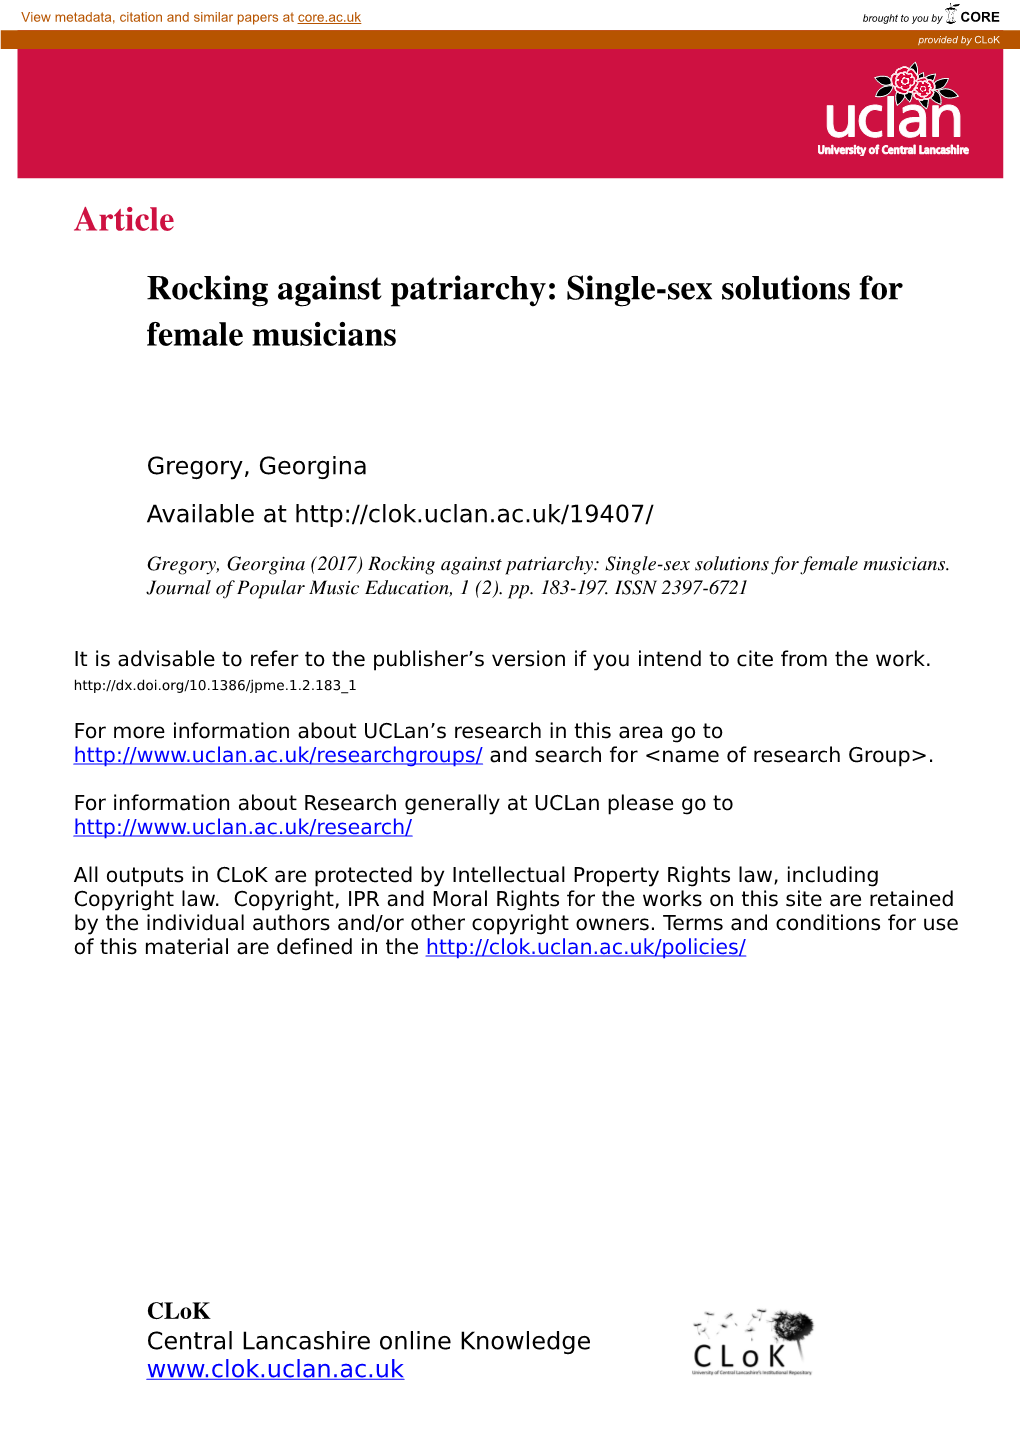 Rocking Against Patriarchy: Single-Sex Solutions for Female Musicians’, Journal of Popular Music Education, 1:2, Pp